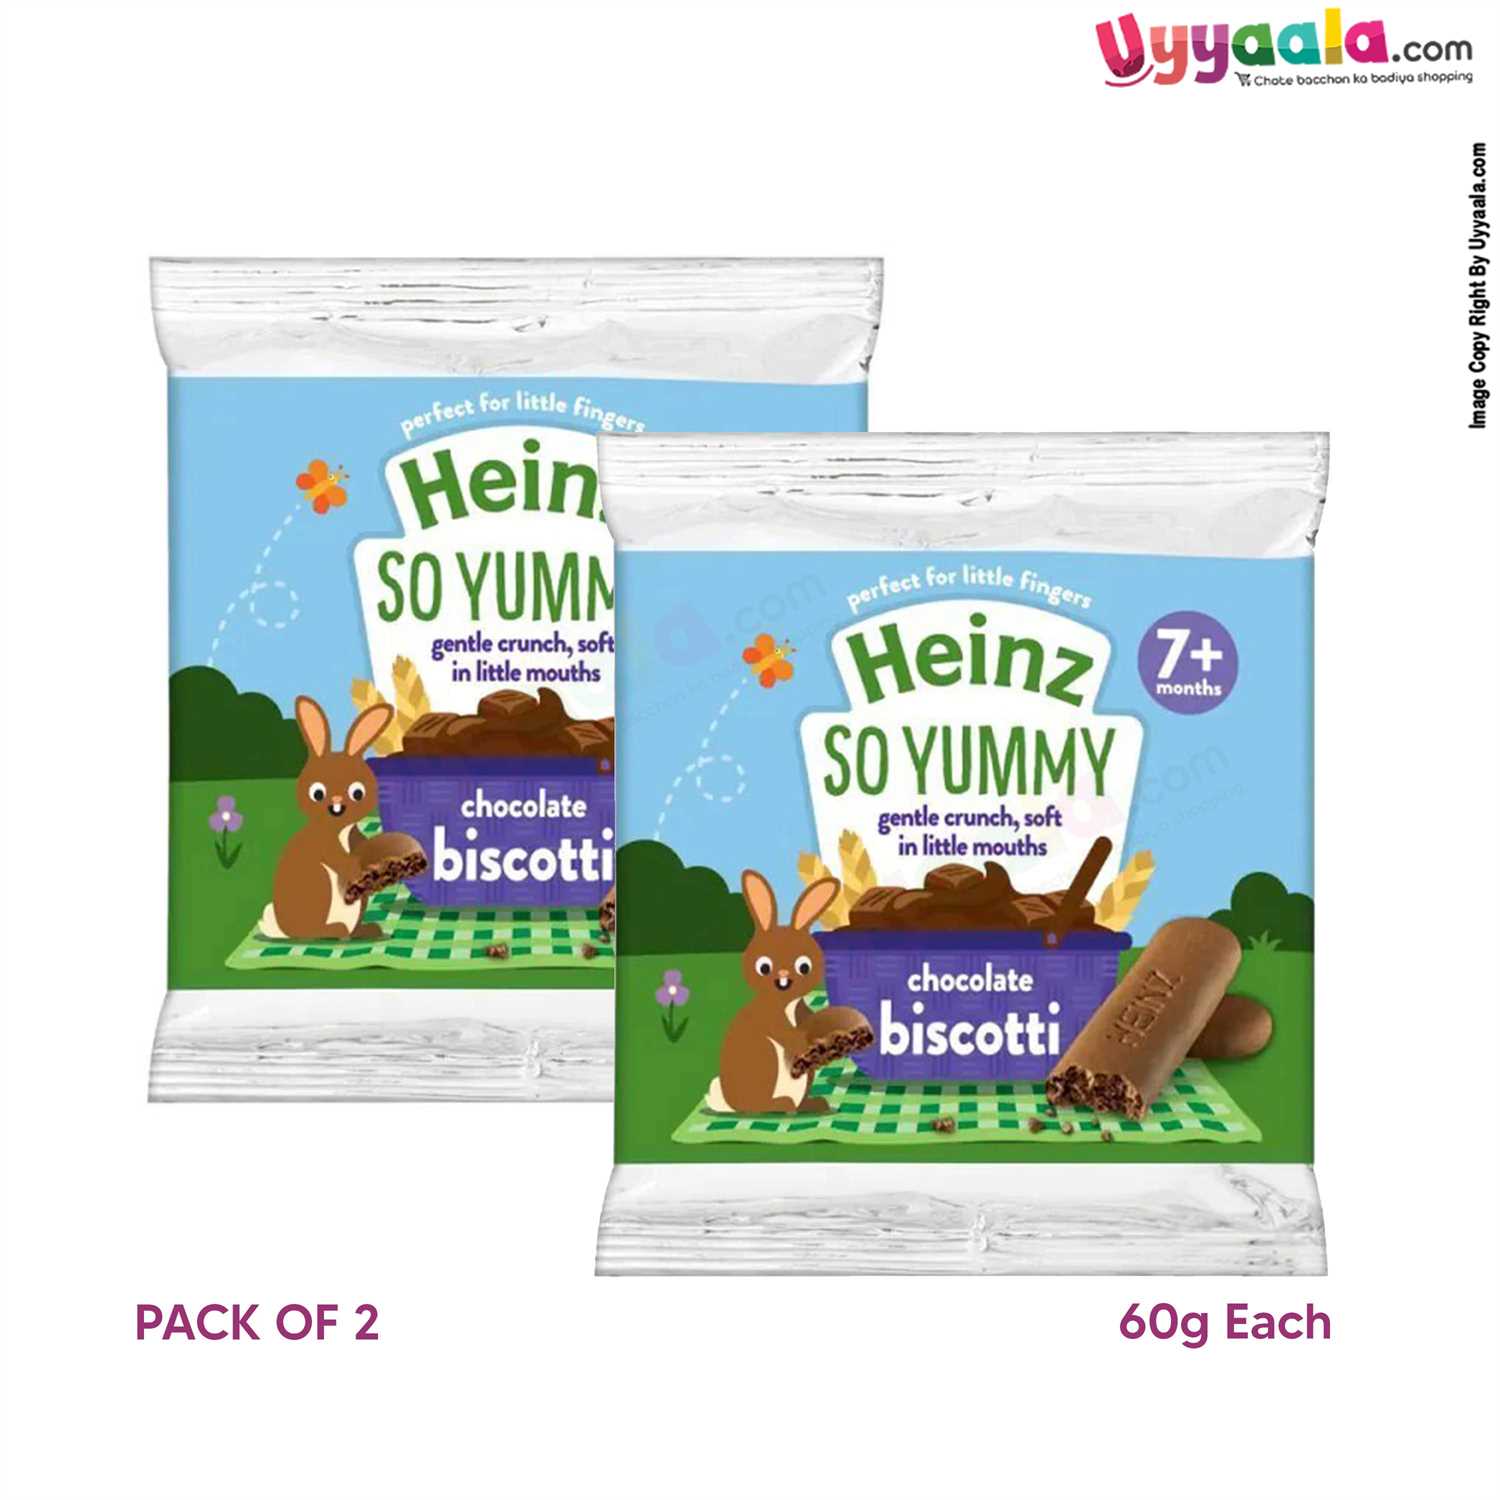 HEINZ SO YUMMY Chocolate biscotti for Kids snacks Pack of 2 - Chocolate Biscuits (60 g each)